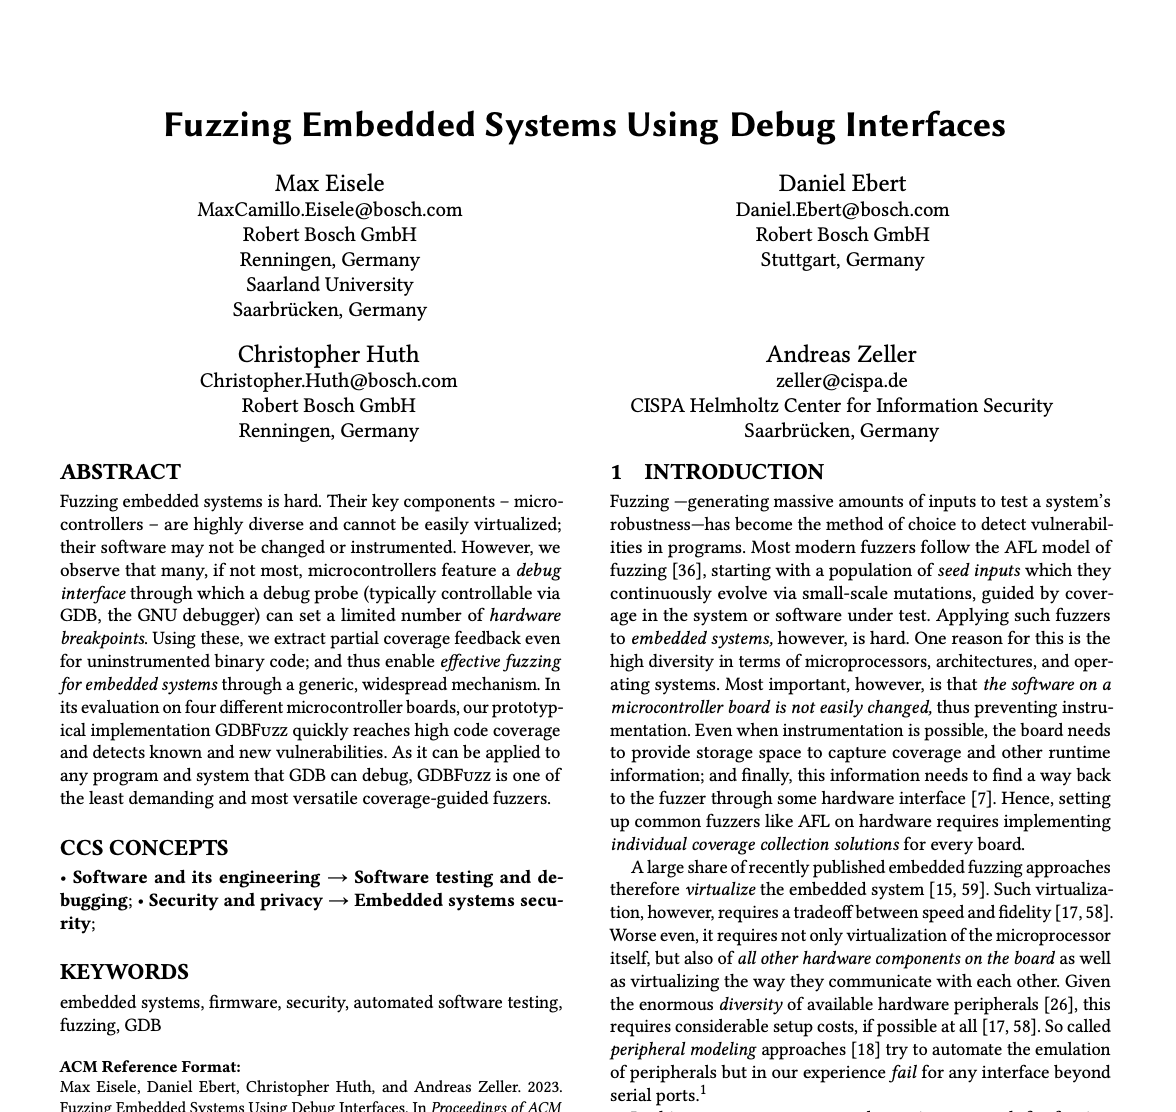 Fuzzing Embedded Systems Using Debug Interfaces 

Max Eisele MaxCamillo.Eisele@bosch.com Robert Bosch GmbH Renningen, Germany Saarland University Saarbrücken, Germany

Christopher Huth Christopher.Huth@bosch.com Robert Bosch GmbH Renningen, Germany

Daniel Ebert Daniel.Ebert@bosch.com Robert Bosch GmbH Stuttgart, Germany

Andreas Zeller zeller@cispa.de
CISPA Helmholtz Center for Information Security Saarbrücken, Germany

ABSTRACT
Fuzzing embedded systems is hard. Their key components – micro- controllers – are highly diverse and cannot be easily virtualized; their software may not be changed or instrumented. However, we observe that many, if not most, microcontrollers feature a debug interface through which a debug probe (typically controllable via GDB, the GNU debugger) can set a limited number of hardware breakpoints. Using these, we extract partial coverage feedback even for uninstrumented binary code; and thus enable effective fuzzing for embedded systems through a generic, widespread mechanism. In its evaluation on four different microcontroller boards, our prototyp- ical implementation GDBFuzz quickly reaches high code coverage and detects known and new vulnerabilities. As it can be applied to any program and system that GDB can debug, GDBFuzz is one of the least demanding and most versatile coverage-guided fuzzers.